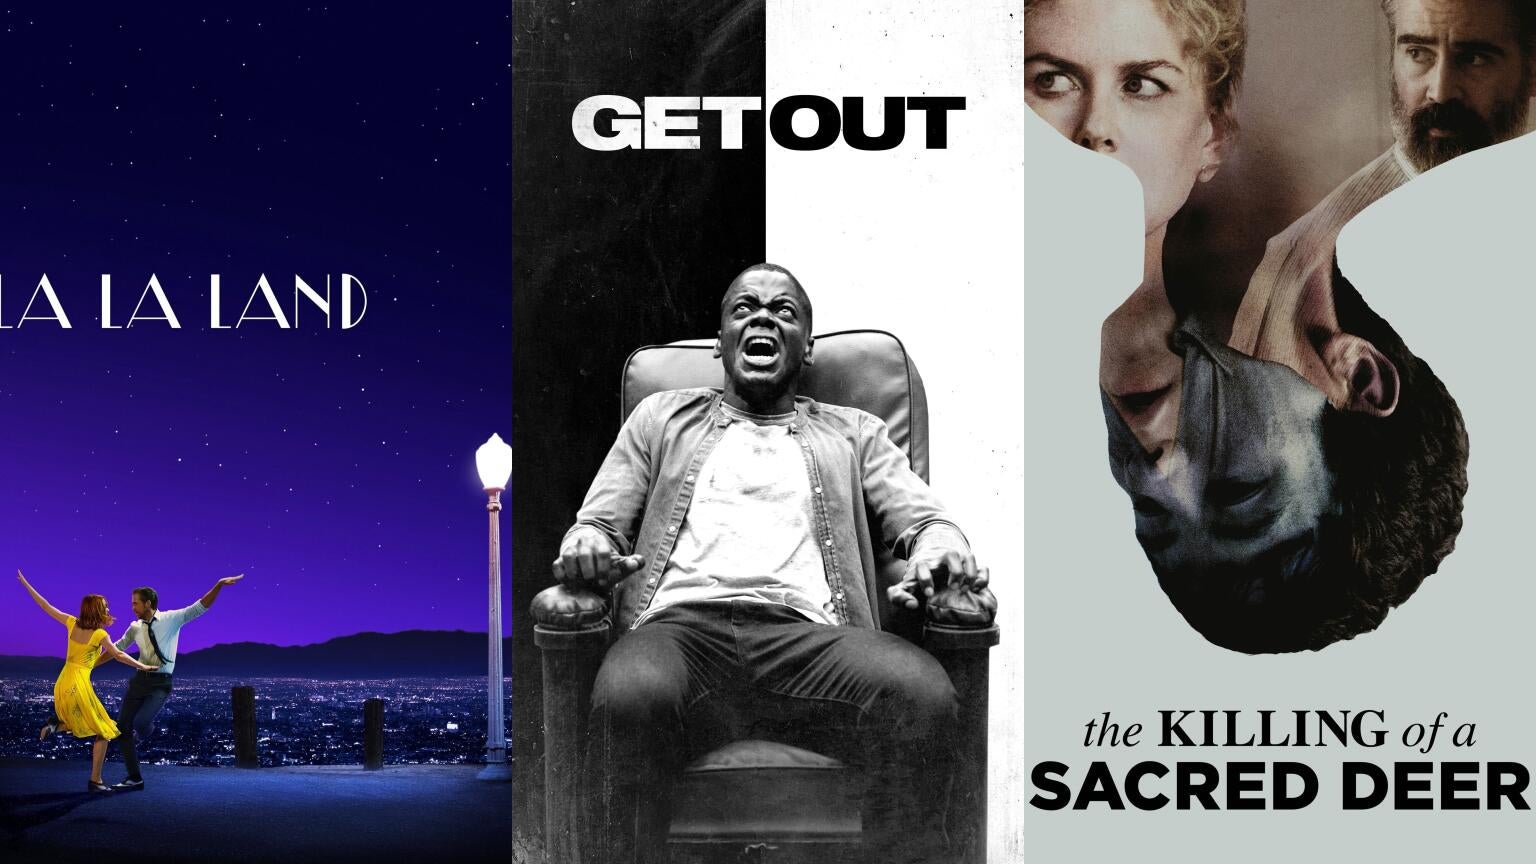 Movie posters for "La La Land," "Get Out," and "The Killing of a Sacred Deer"